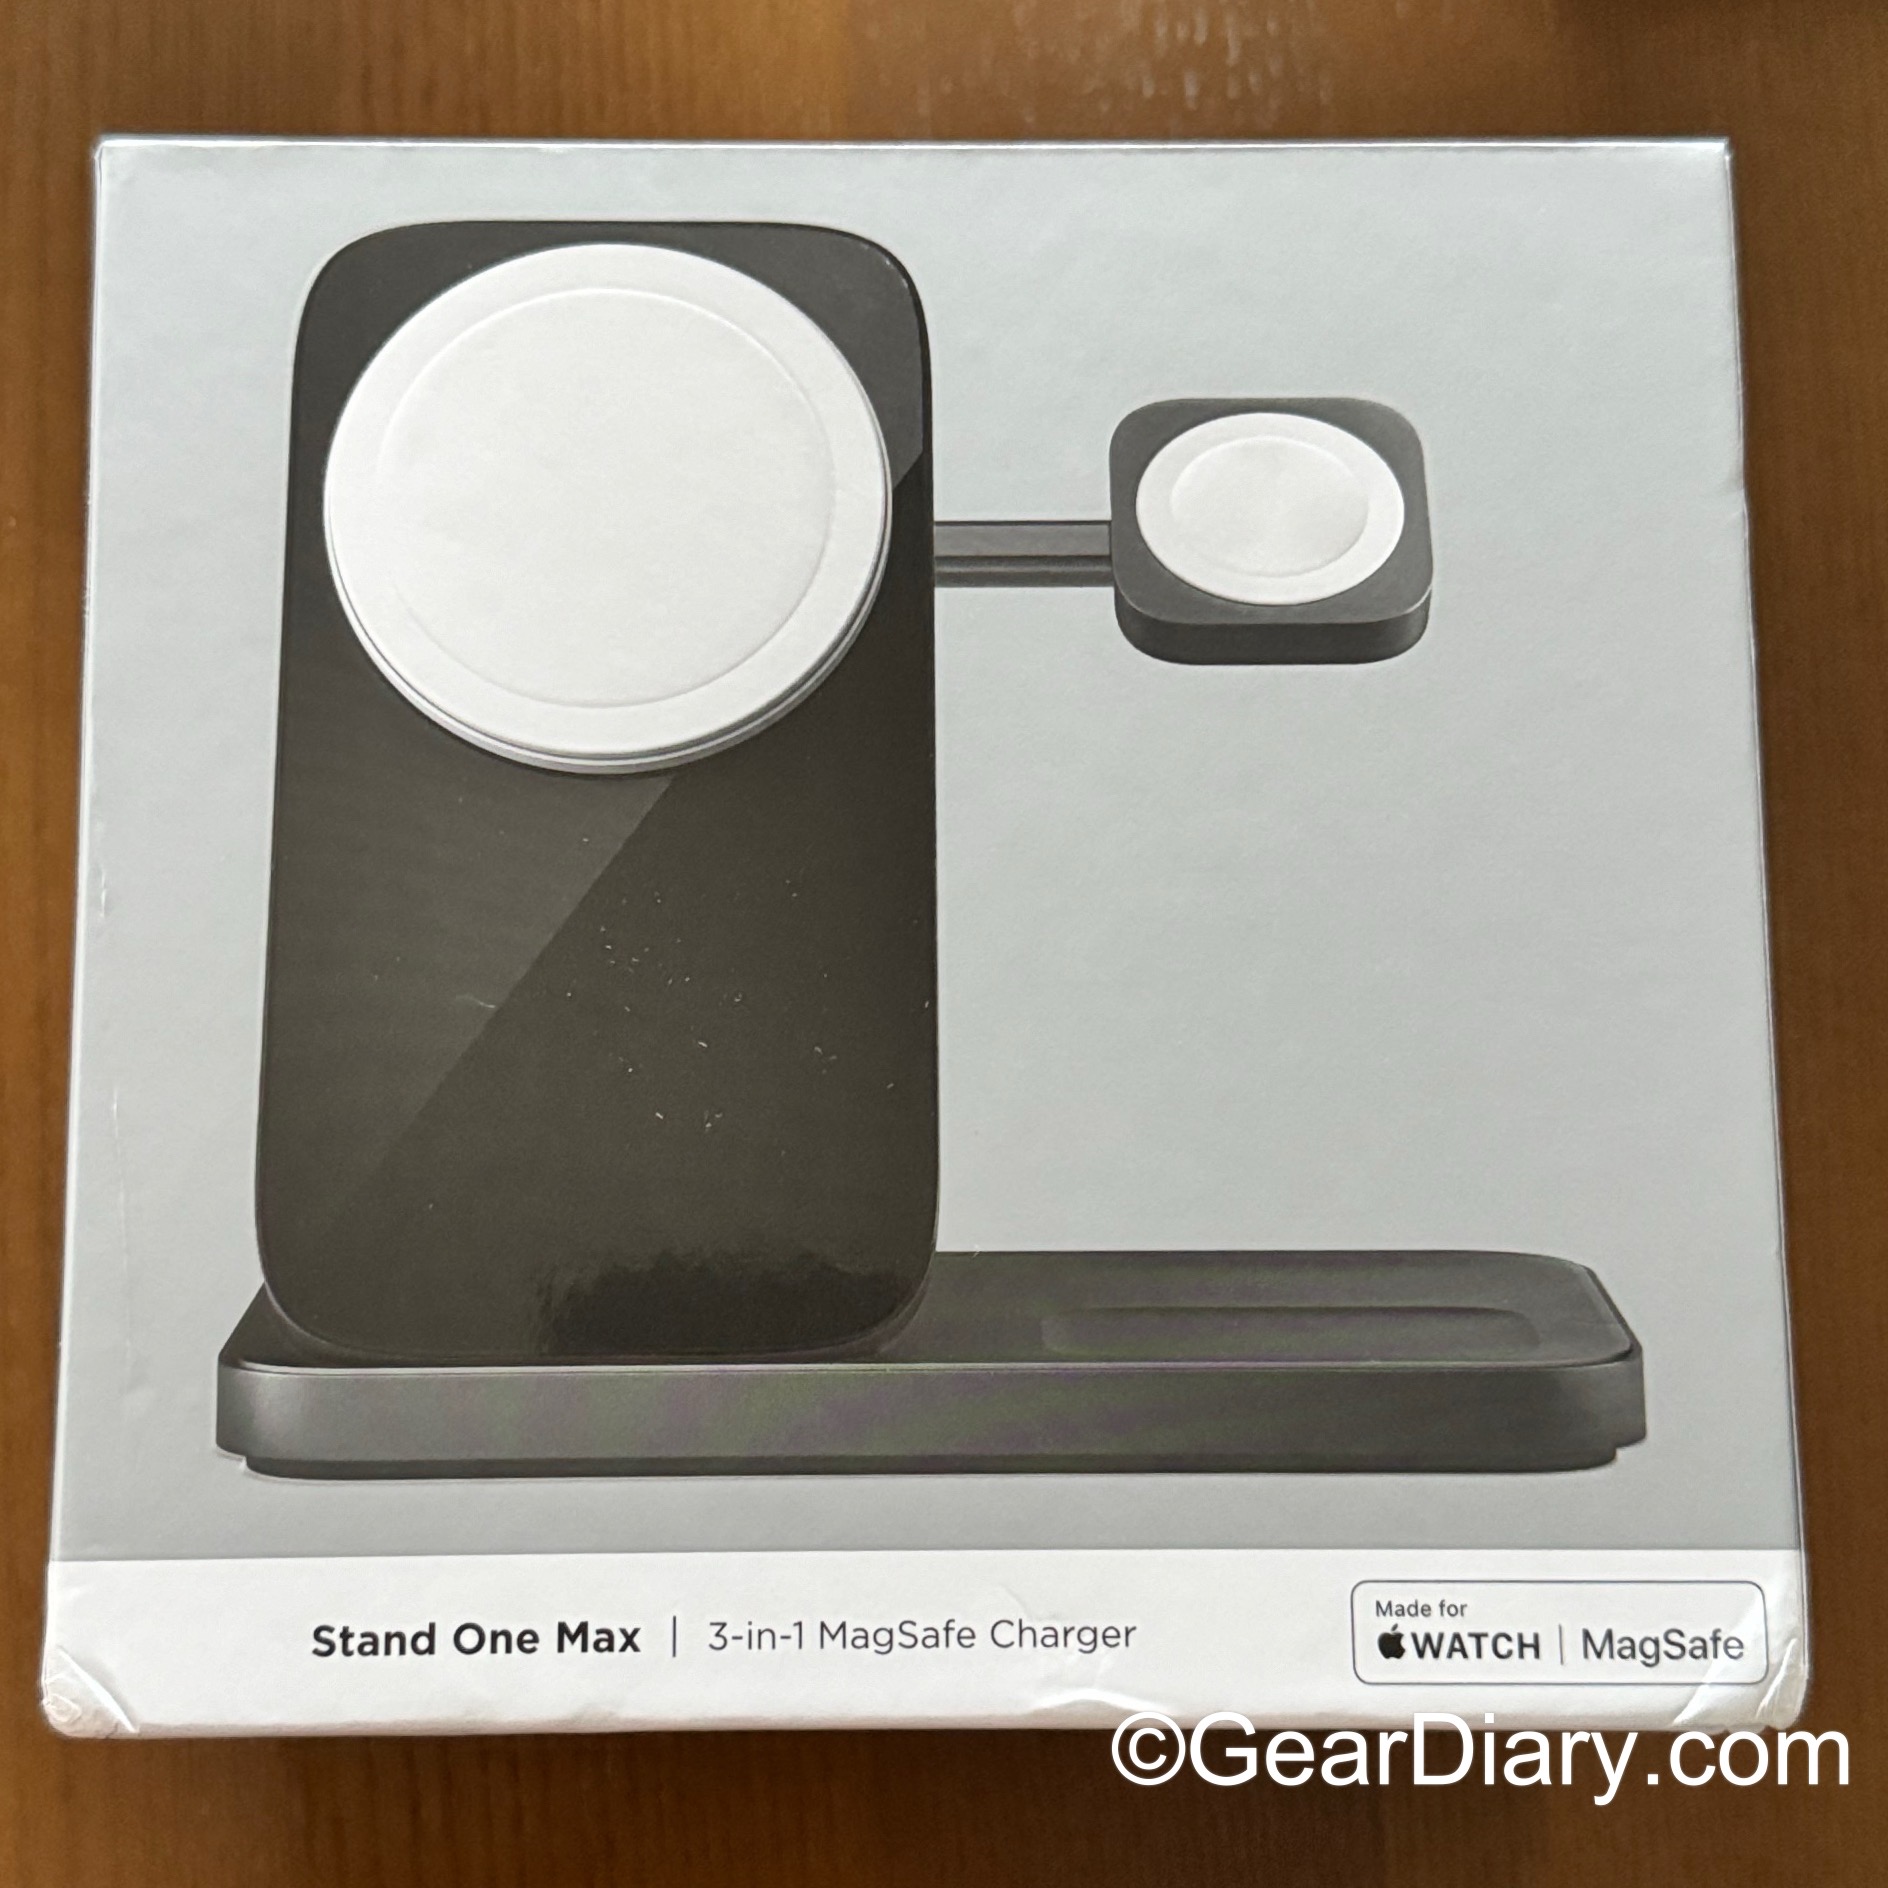 Nomad Stand One Max MagSafe Charger in retail packaging